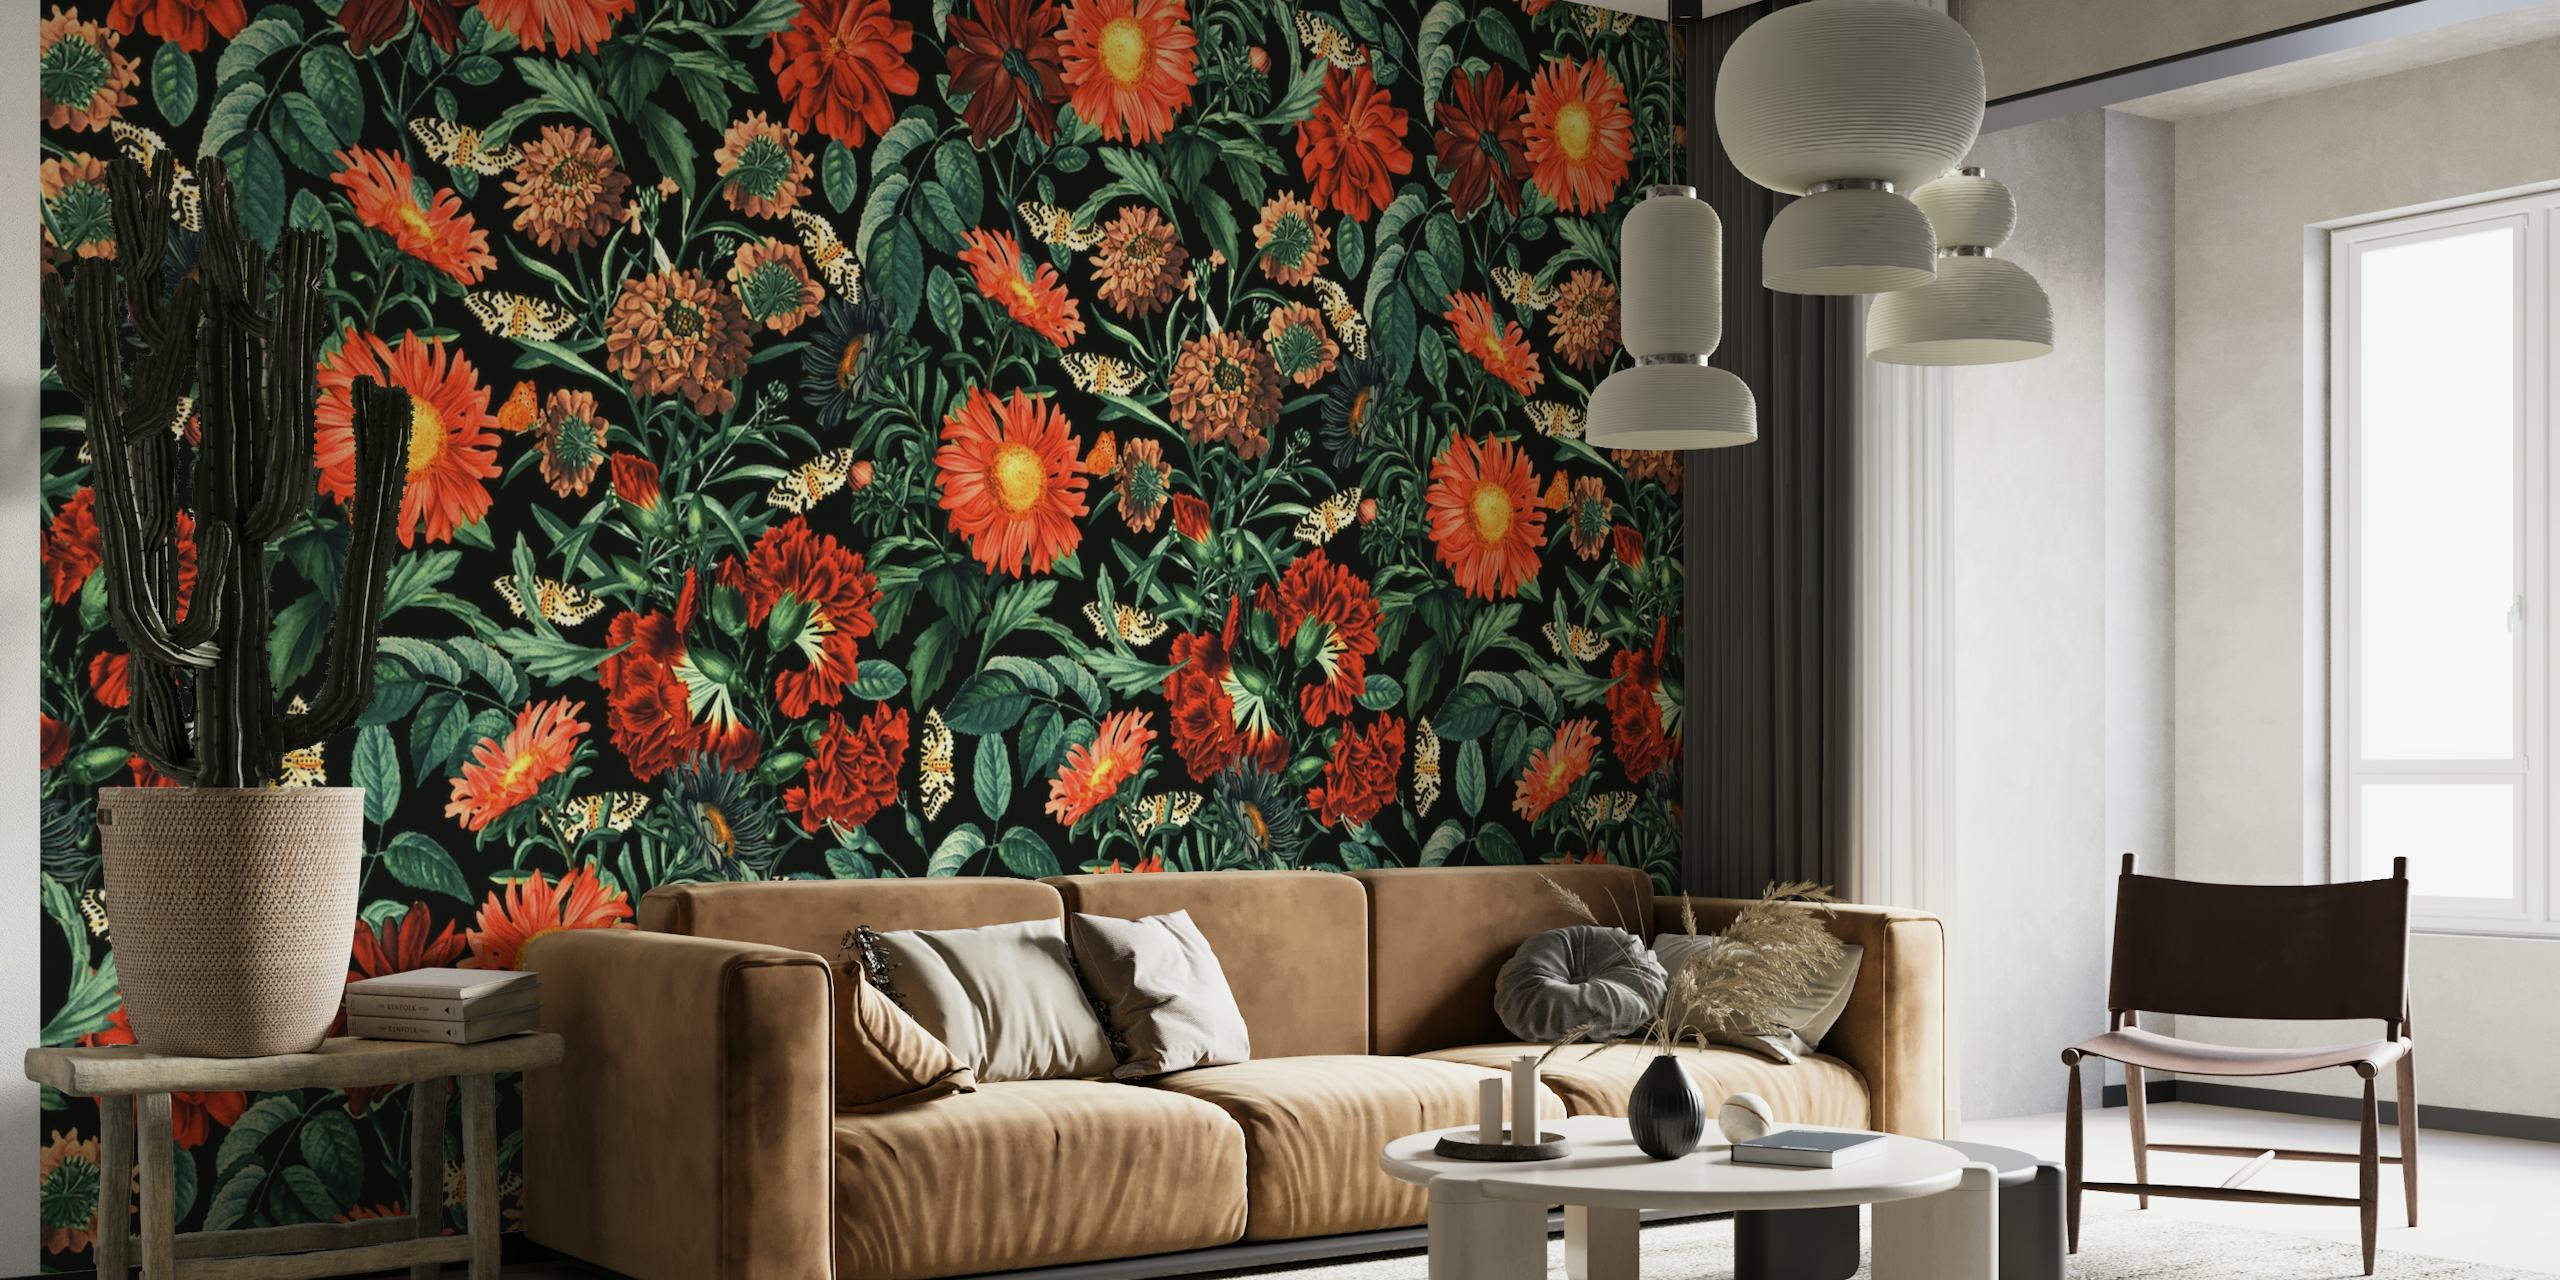 NIGHT FOREST XVIII wall mural showing vibrant flowers and lush greenery for a captivating natural scenery.